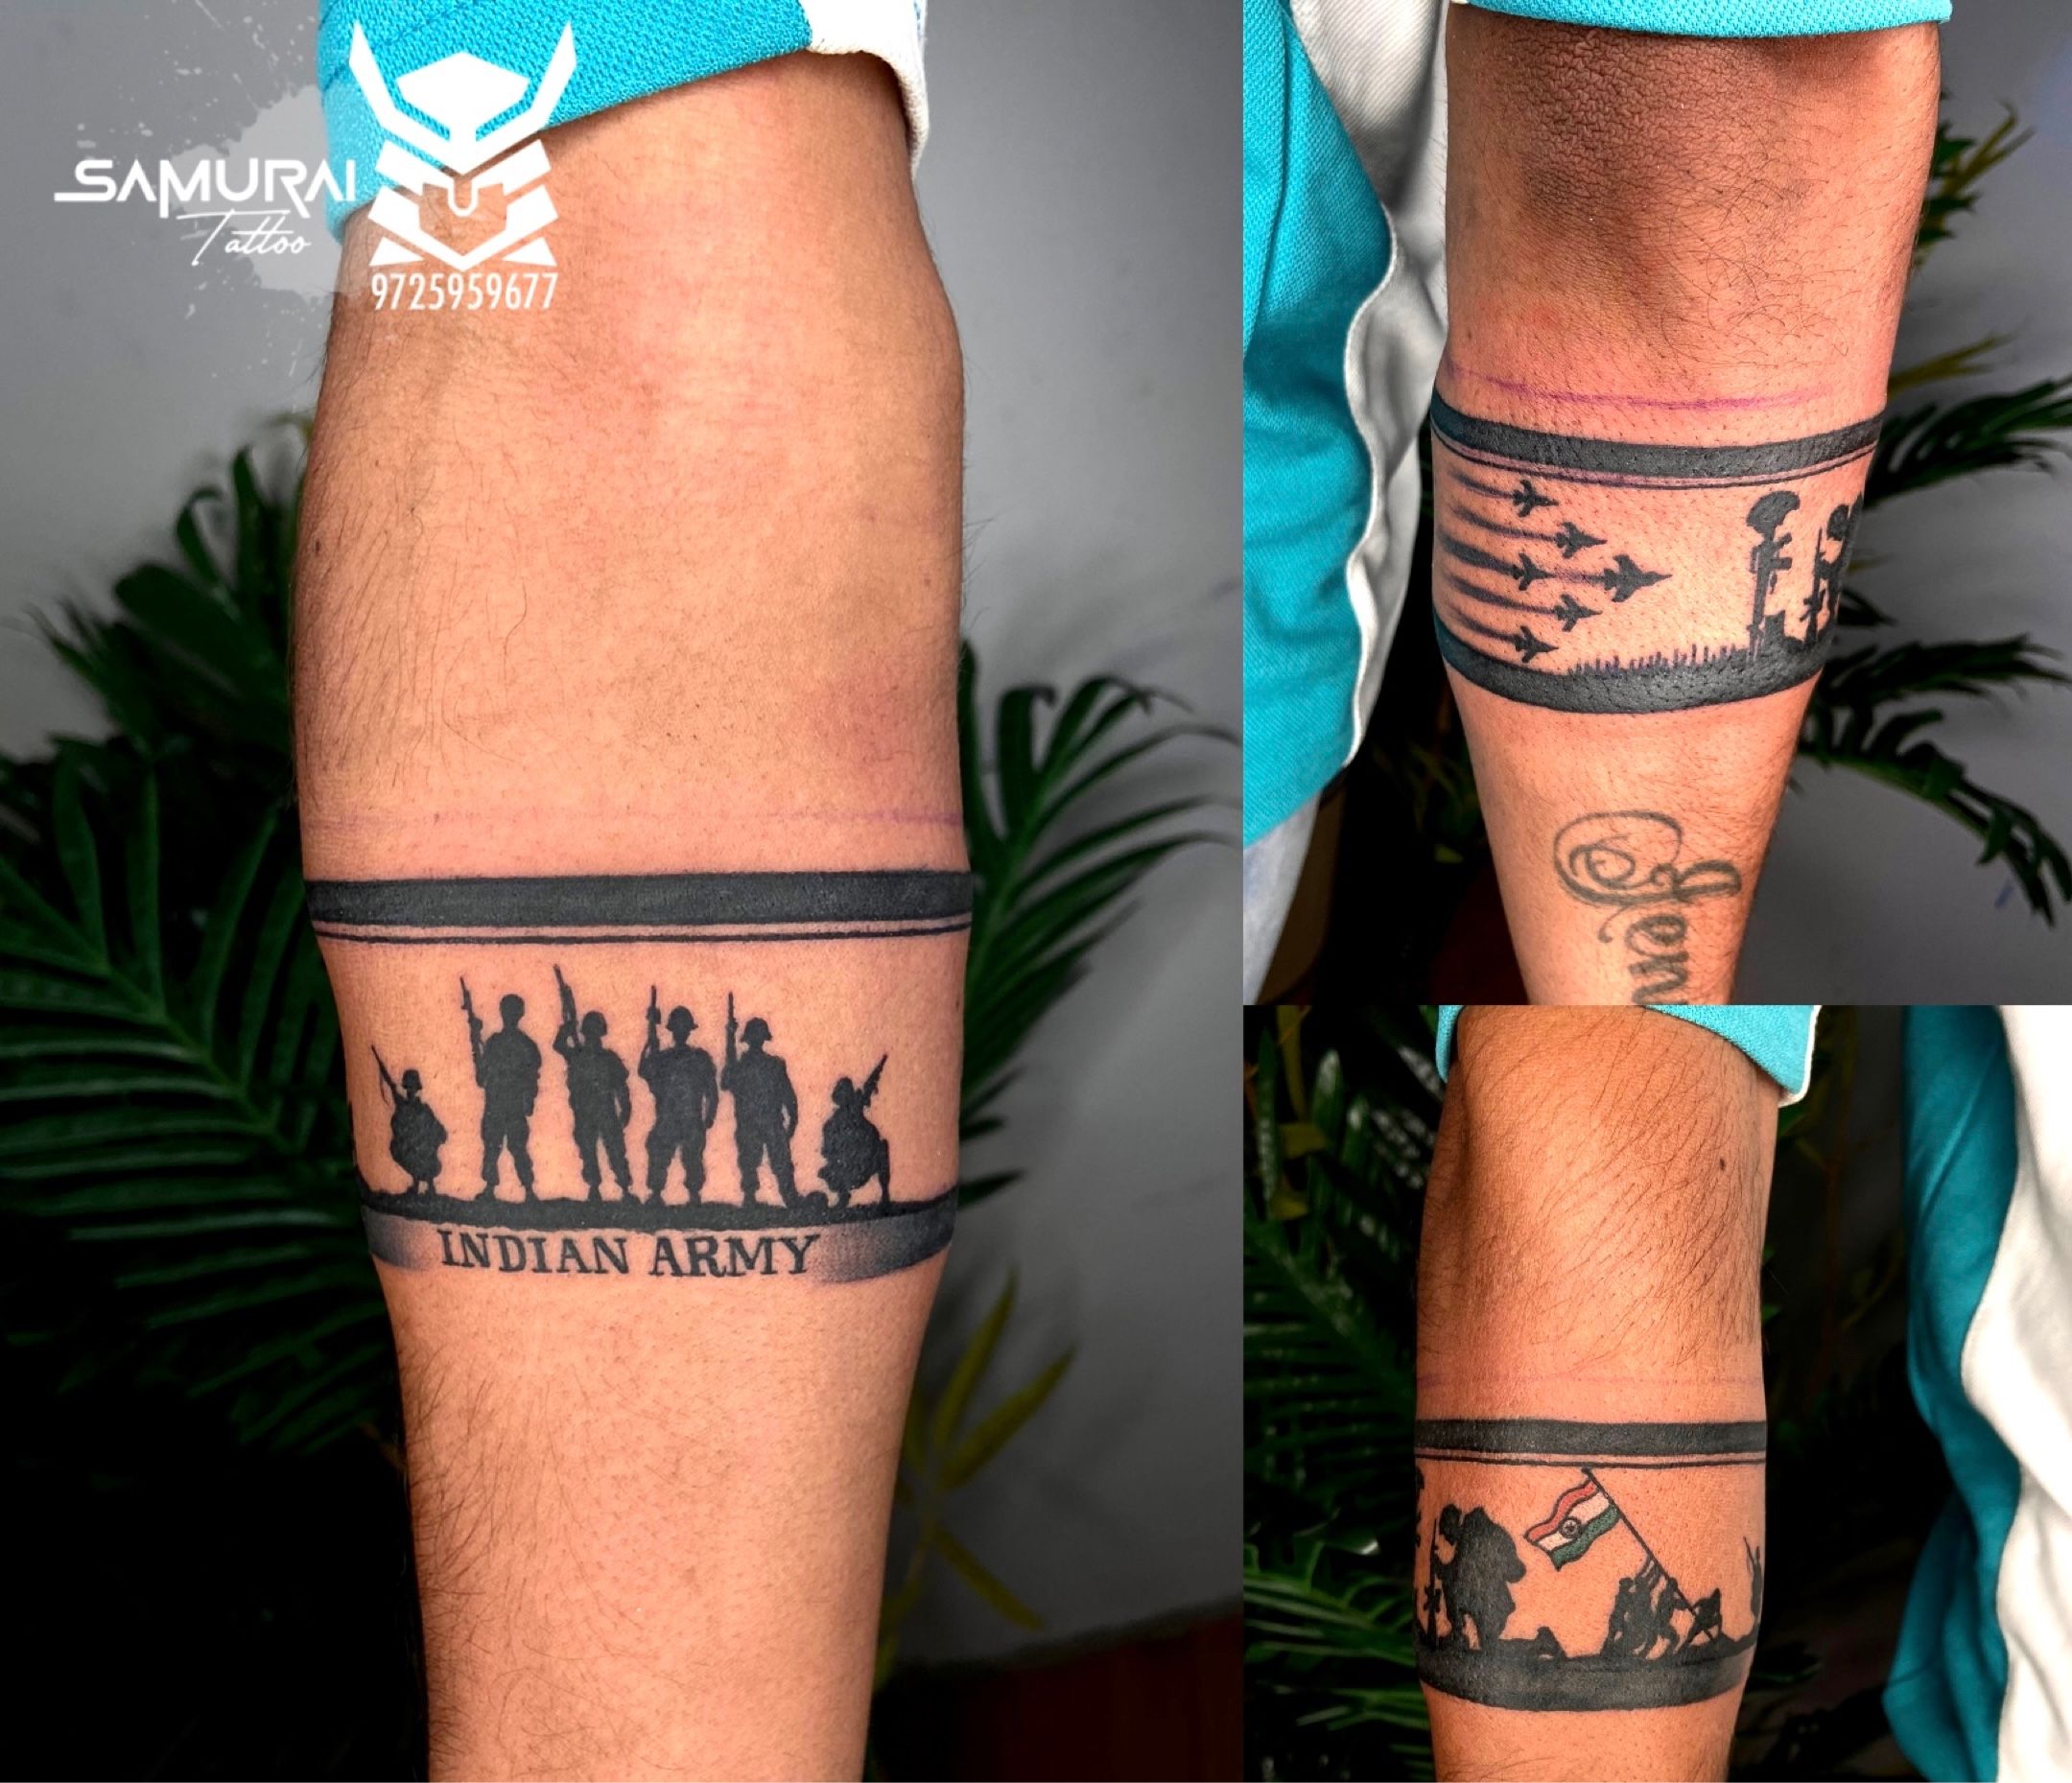  Band Tattoo Guide  Meaning and 15 tattoos